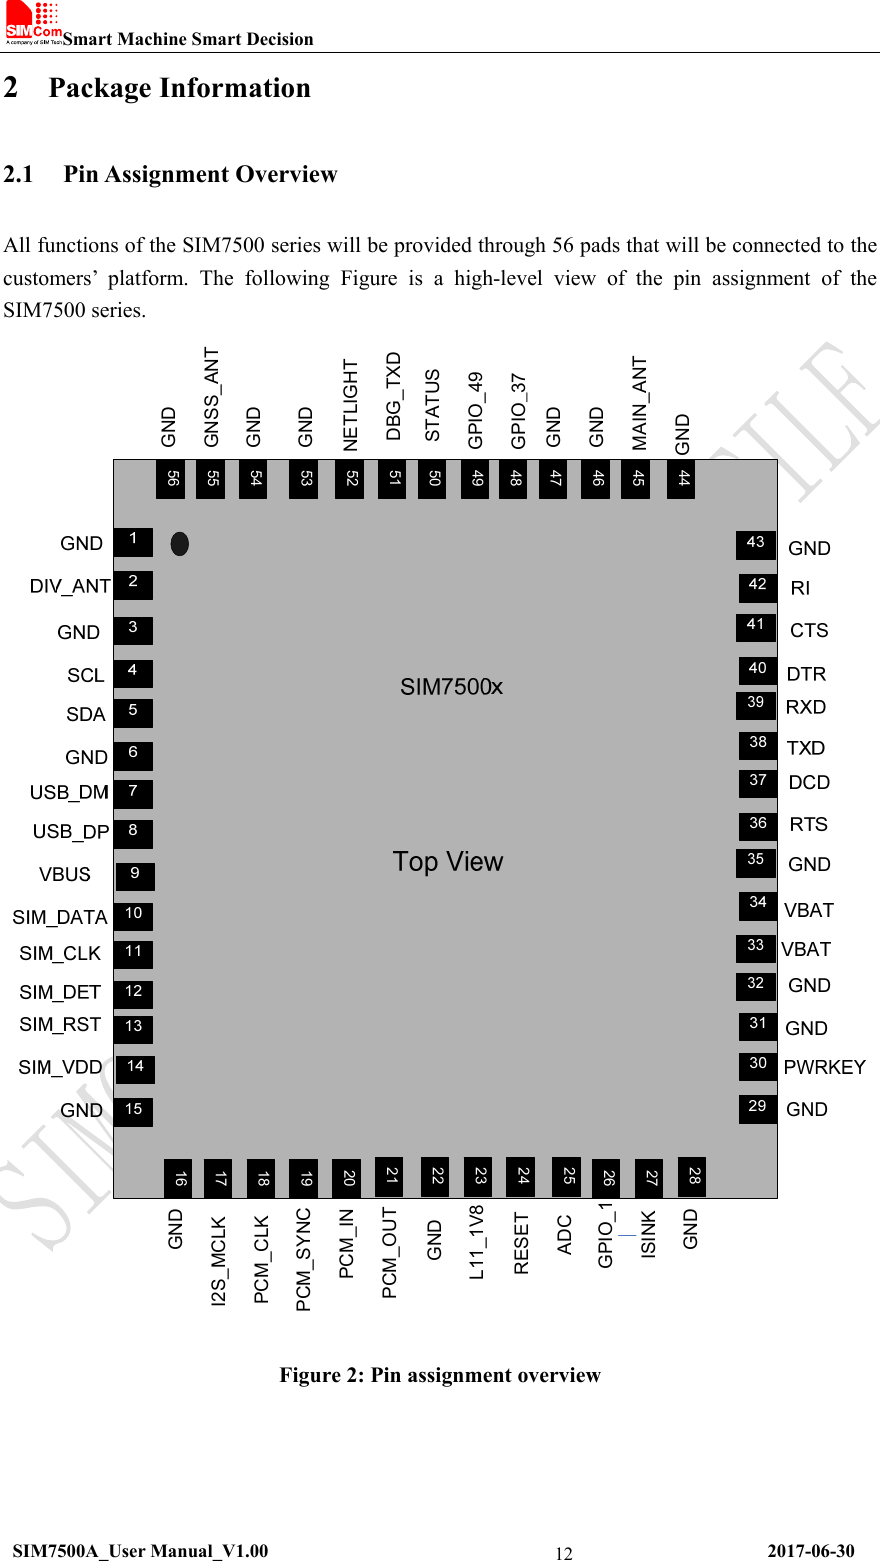 Smart Machine Smart Decision   SIM7500A_User Manual_V1.00                                                      2017-06-30 122 Package Information 2.1 Pin Assignment Overview All functions of the SIM7500 series will be provided through 56 pads that will be connected to the customers’  platform.  The  following  Figure  is  a  high-level  view  of the pin assignment of the SIM7500 series. DBG_TXDI2S_MCLKMAIN_ANTNETLIGHTSTATUS16GND28272625242322212019181756444546474849505152535455GNDPCM_CLKPCM_SYNCPCM_INPCM_OUTGNDL11_1V8RESETADCGPIO_1ISINKGNDGNDGNDGPIO_37GPIO_49GNDGNDGNSS_ANTGND Figure 2: Pin assignment overview 